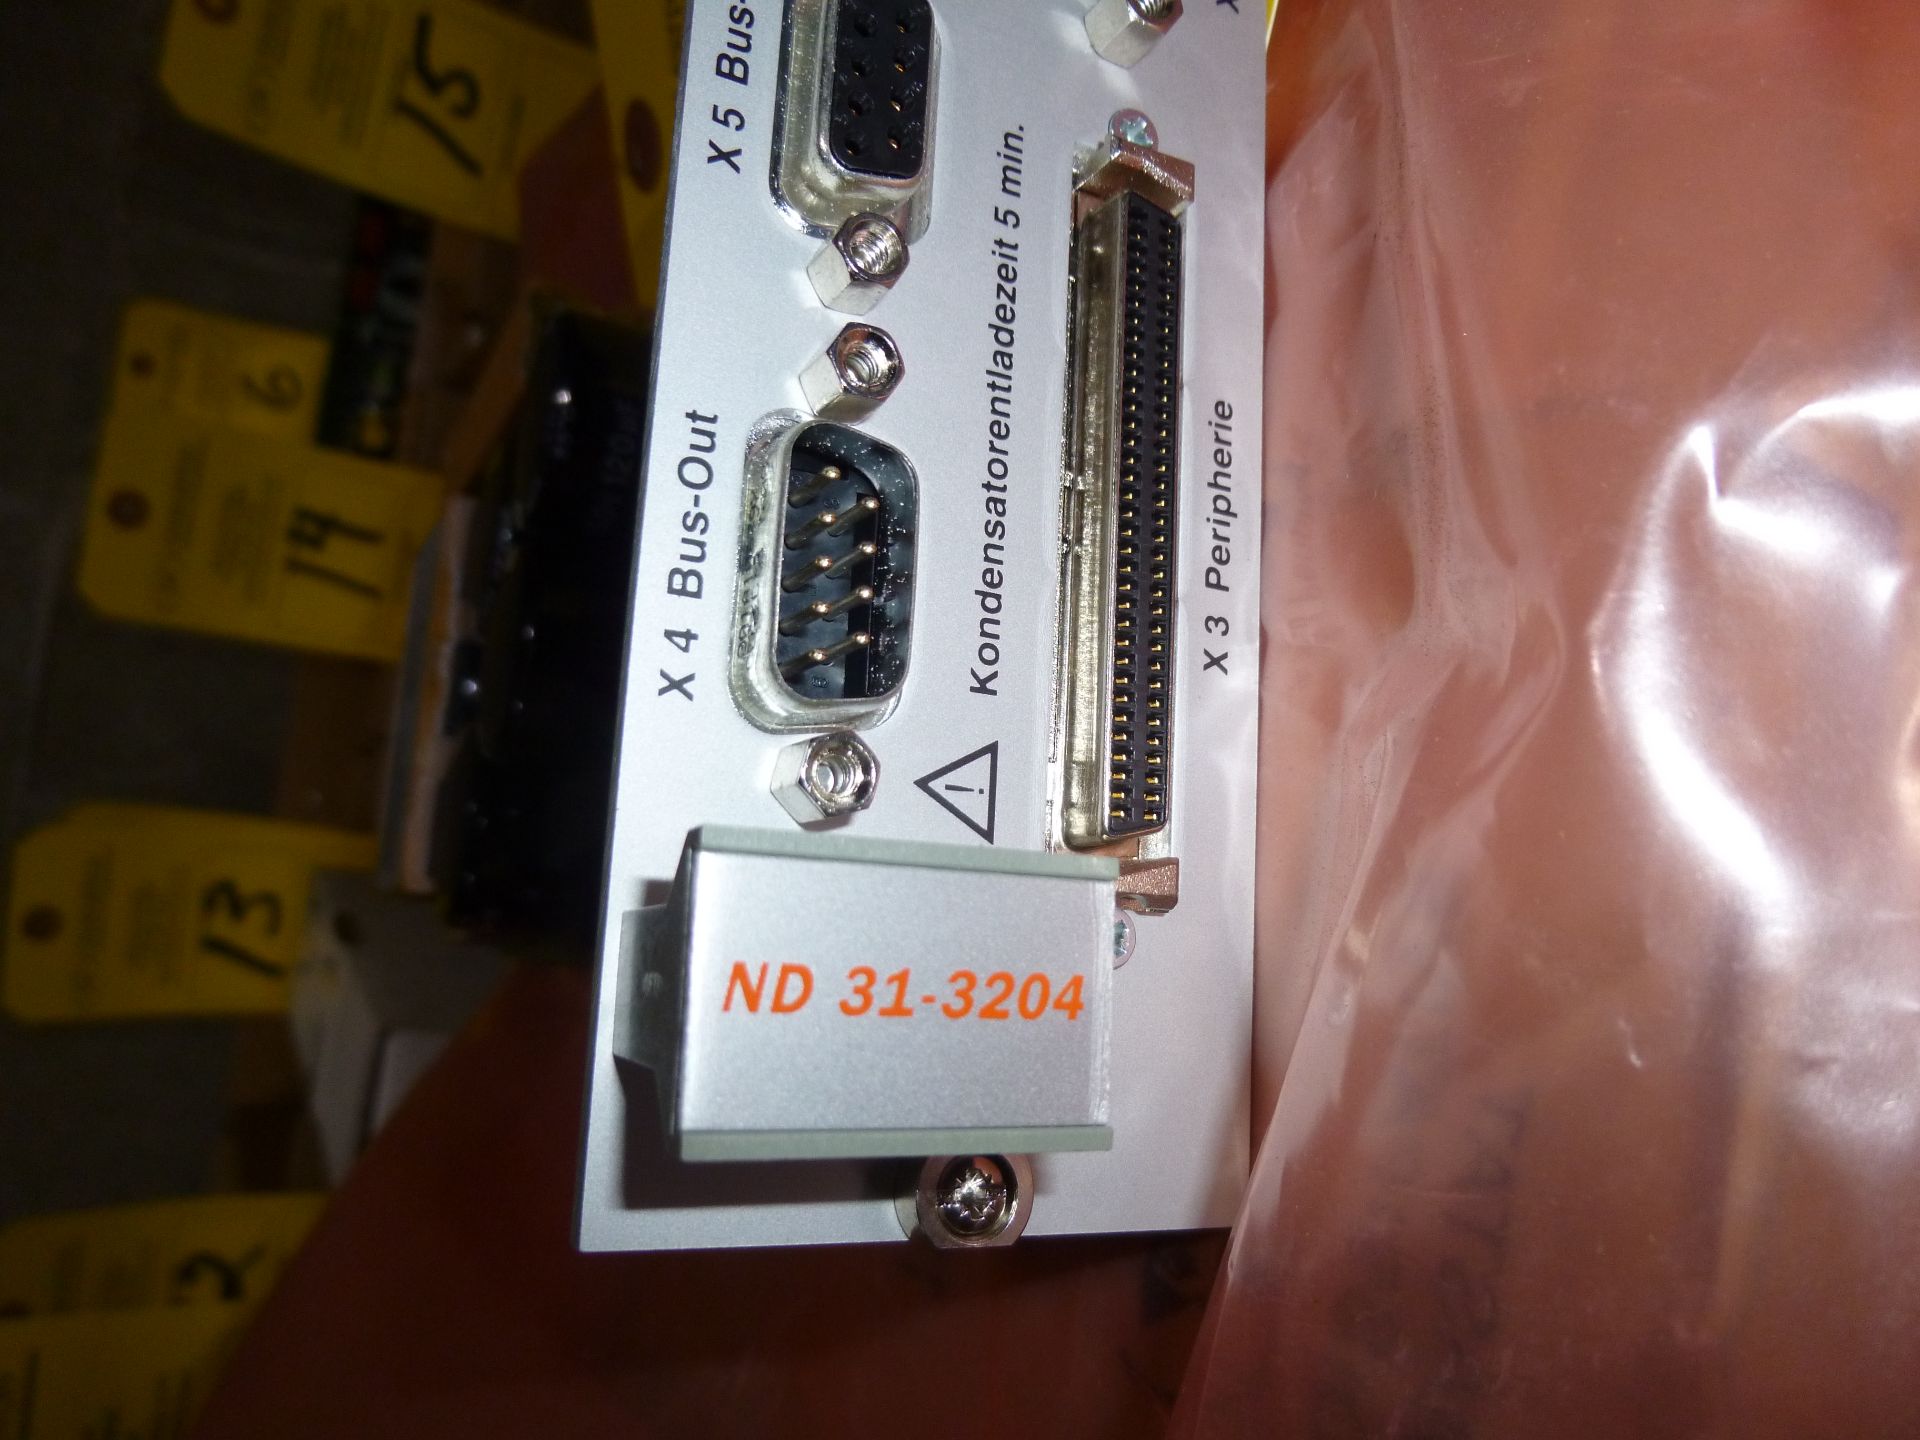 Novotron model ND31-3204, new in package, as always with Brolyn LLC auctions, all lots can be picked - Image 2 of 3